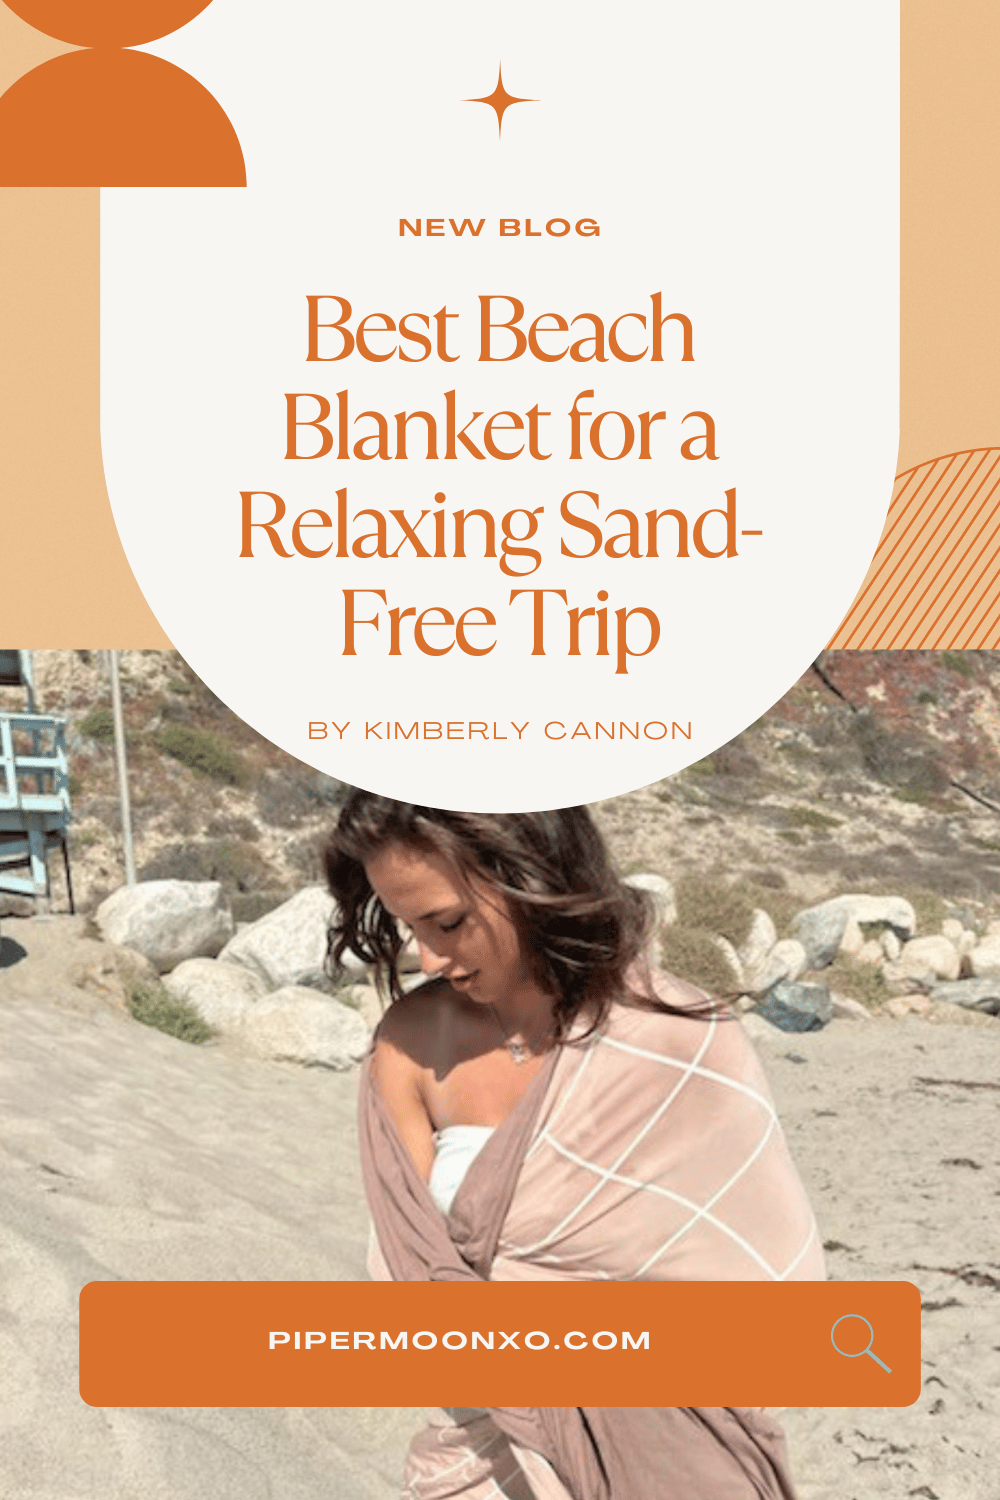 The Best Beach Blanket for a Relaxing Sand-Free Trip